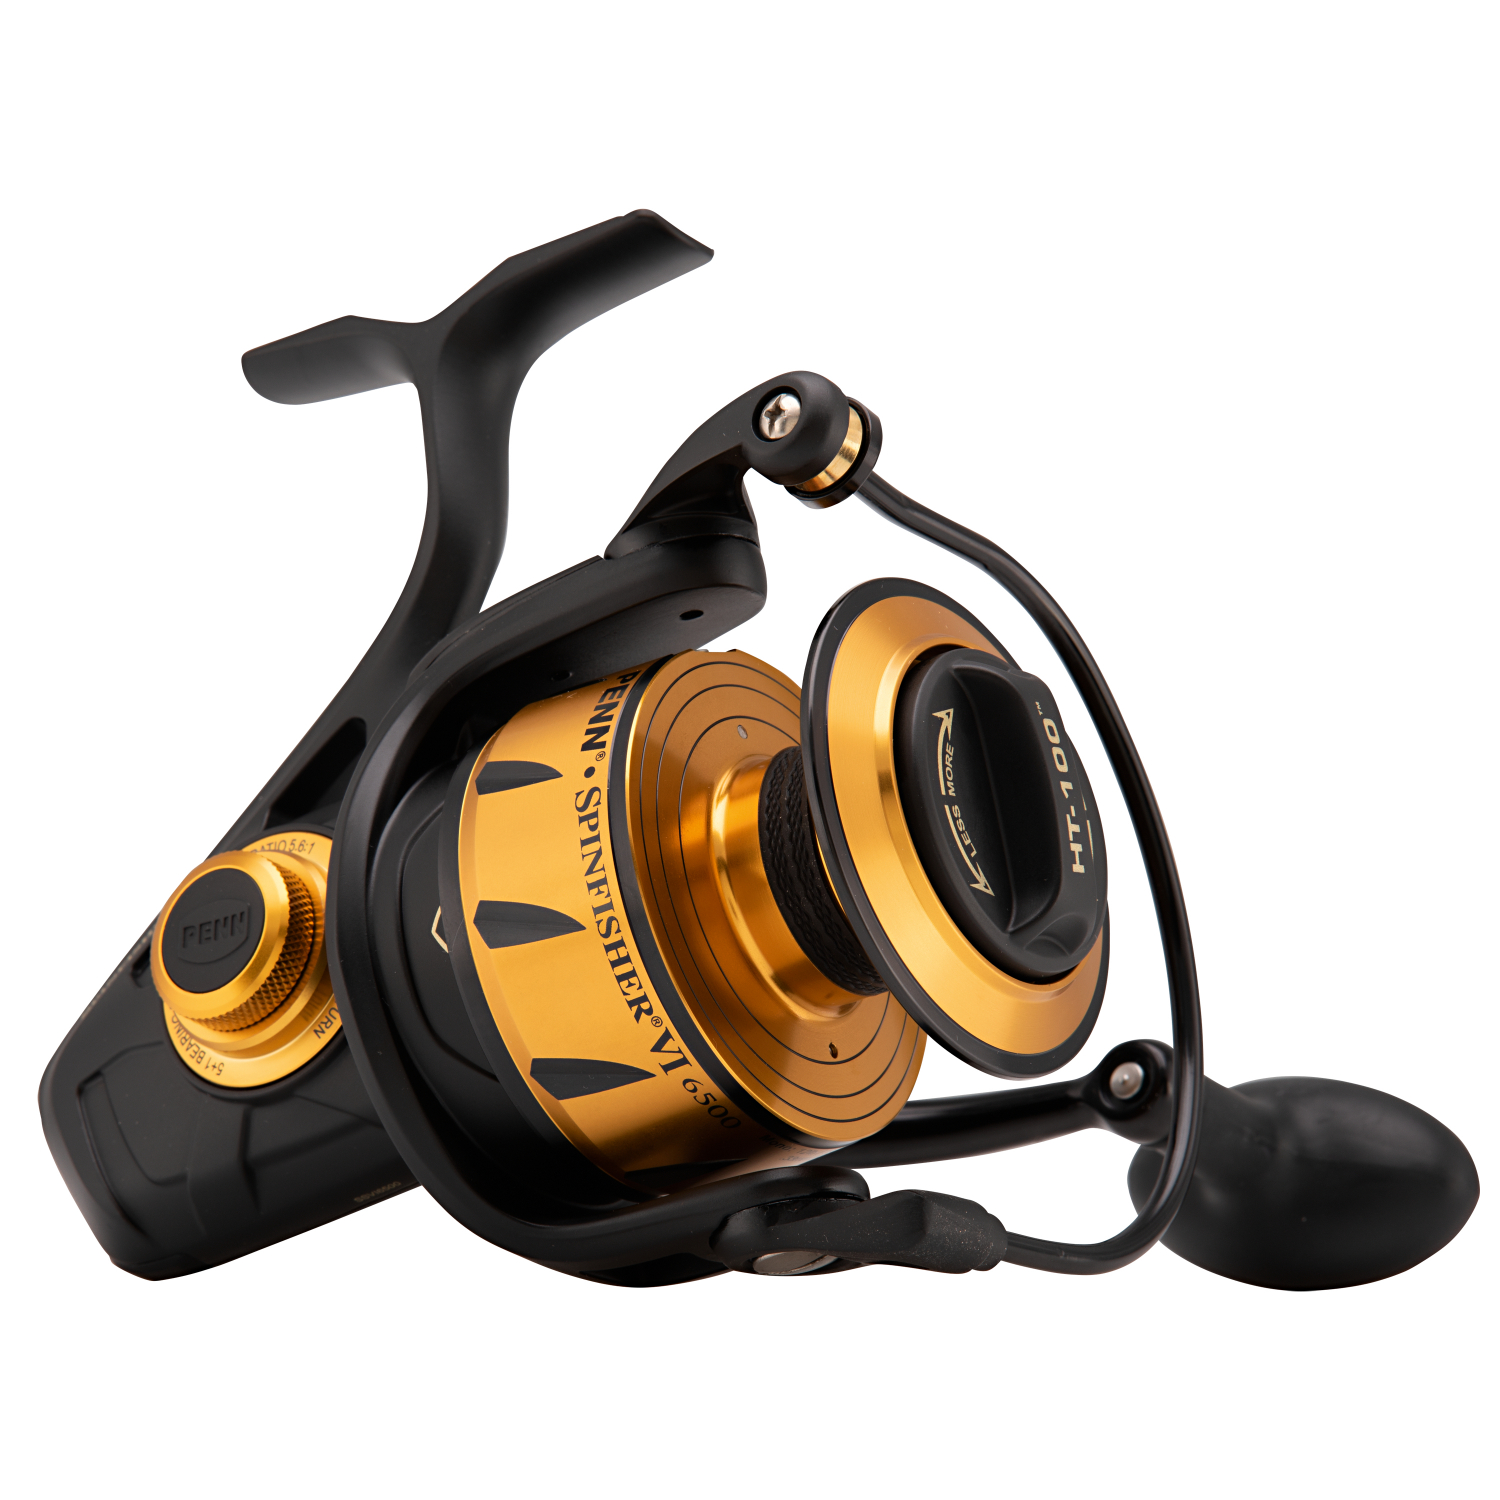 Penn Sea Fishing Reel Spinfisher® VI Spinning at low prices